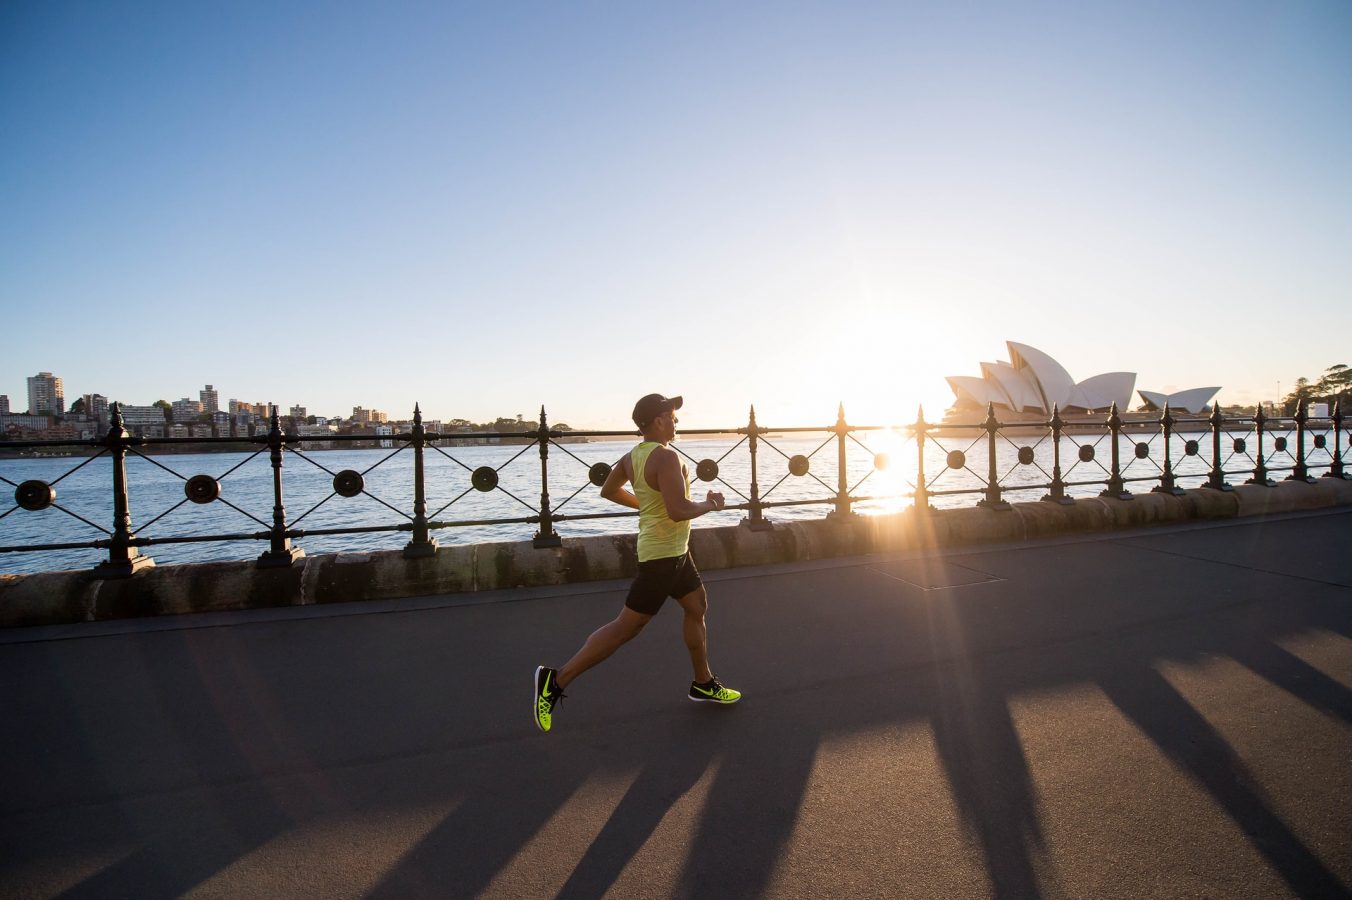 A man jogs along the harbour in Sydney, the sun low on the horizon and the Sydney Opera House in the background.